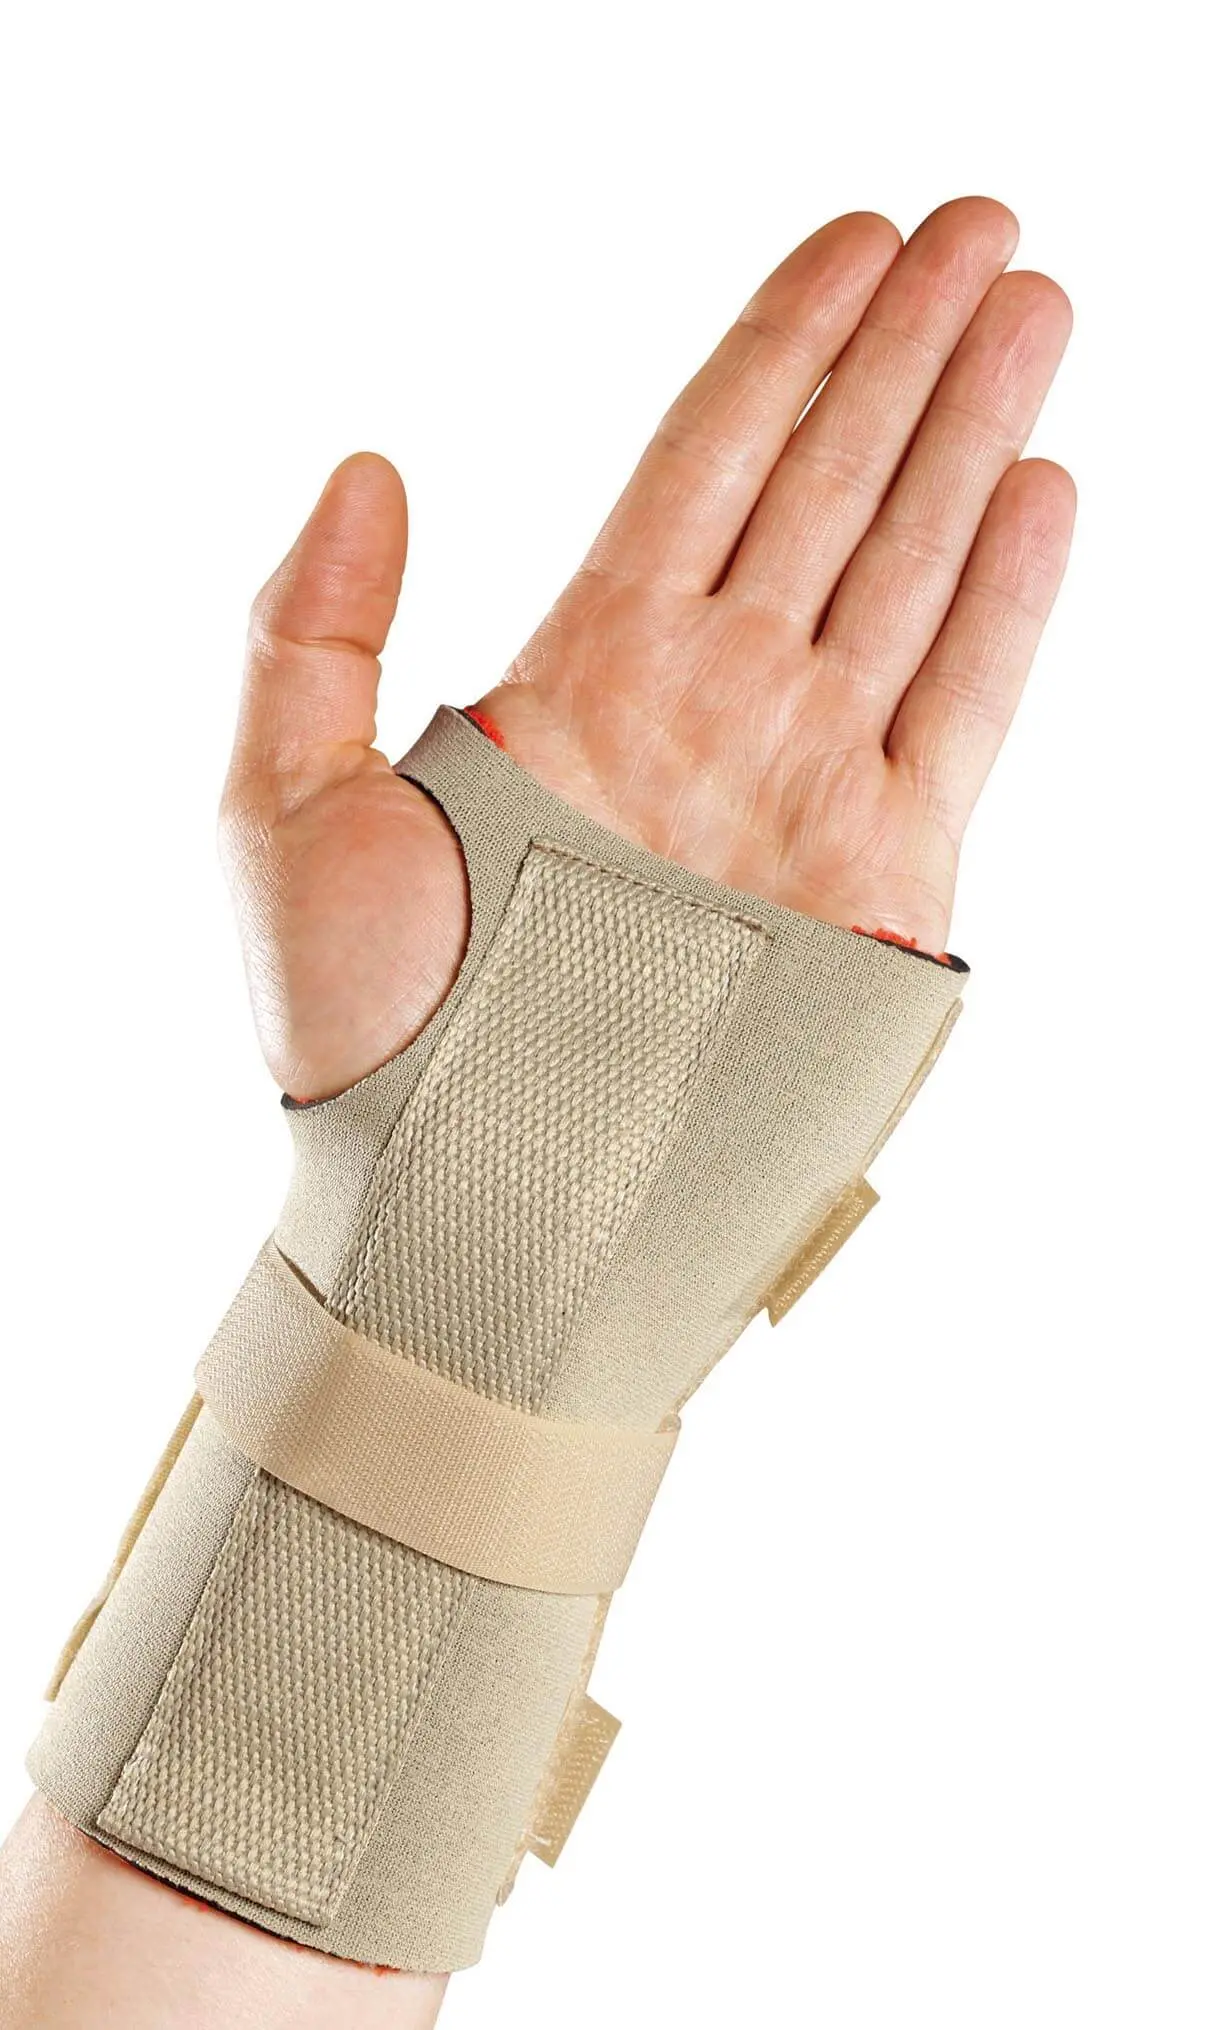 Carpel Tunnel Wrist Brace - Medipost - Left and Right hand versions